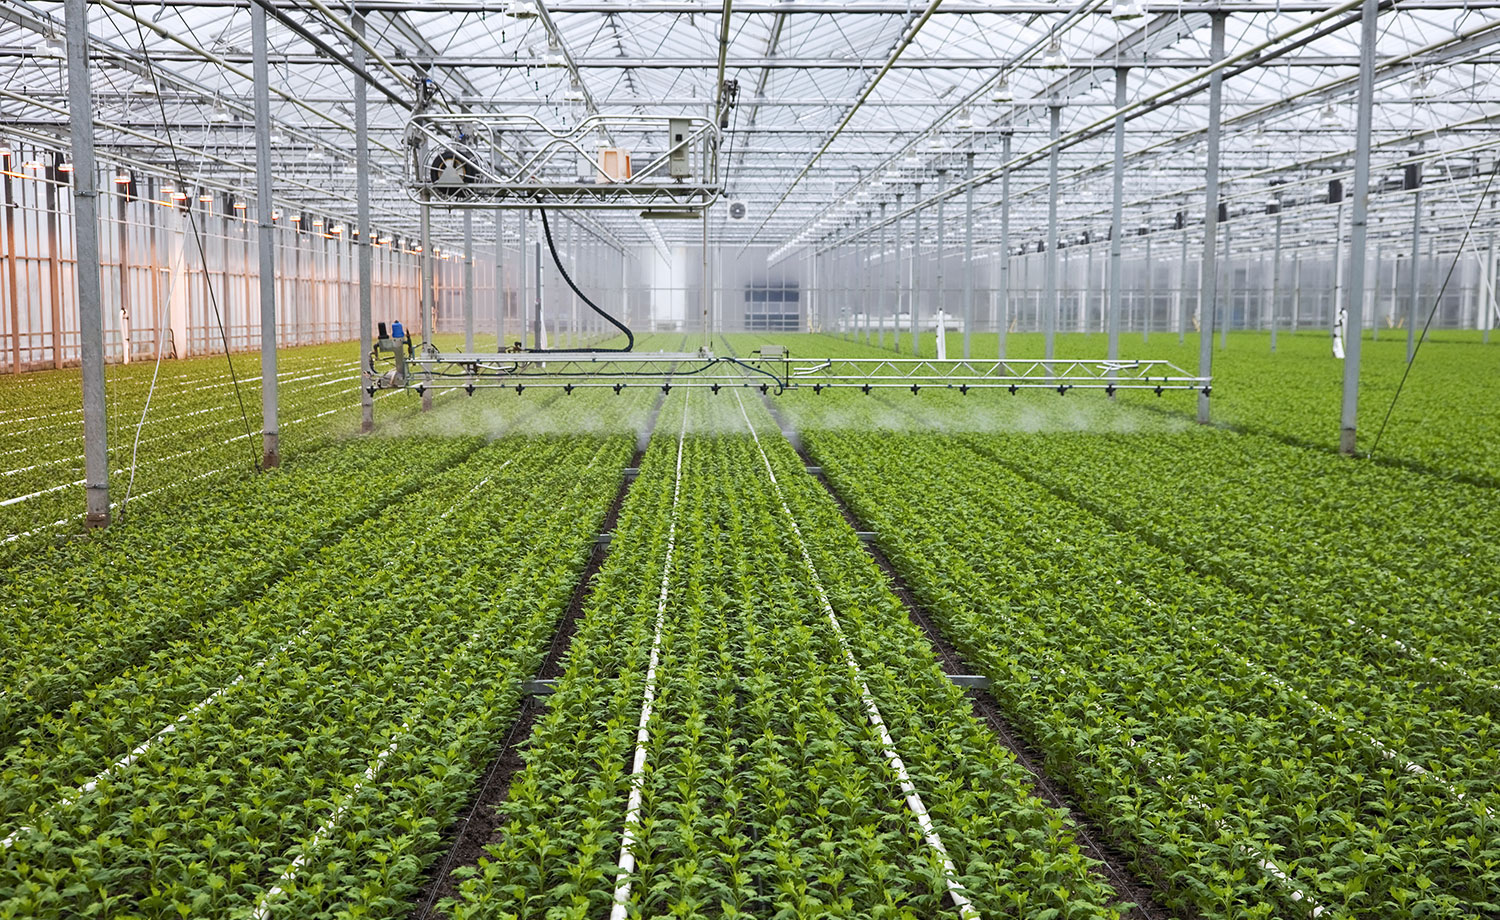 The interior of a large greenhouse.